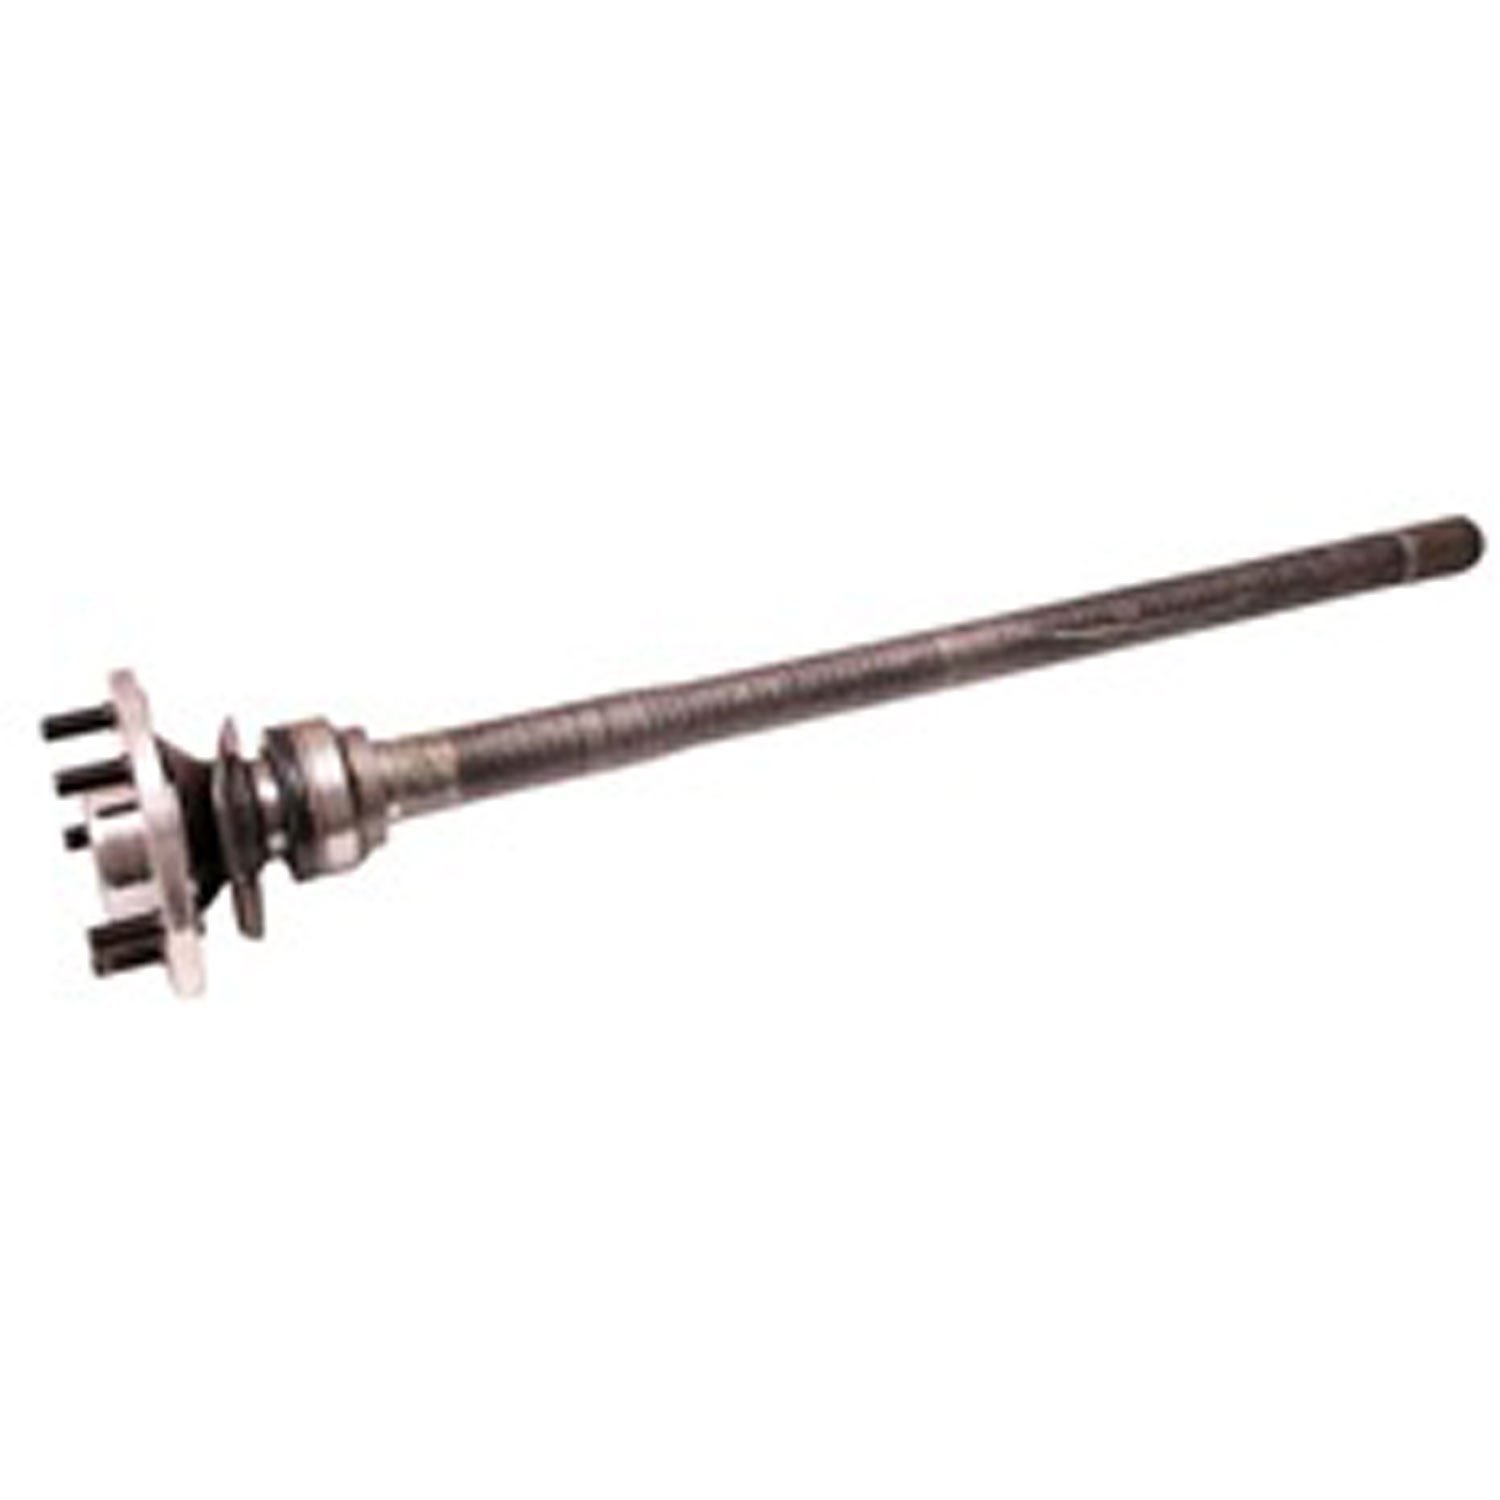 This rear axle shaft for Dana 44 fits the right side of 03-06 Jeep Wrangler TJ with 3.07 to 3.73 rin